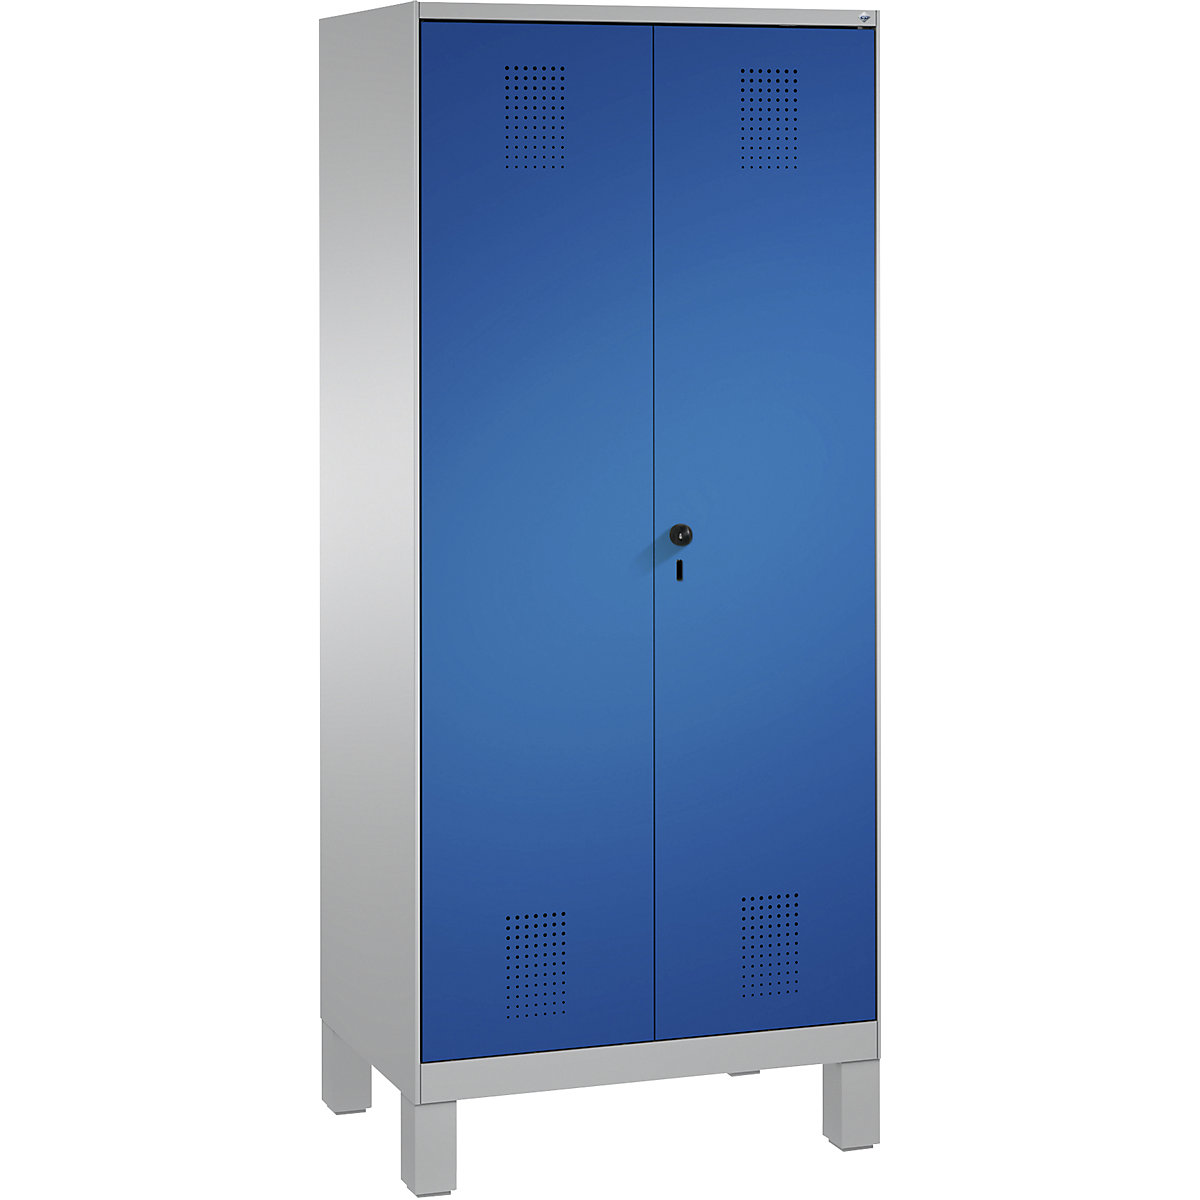 EVOLO cloakroom locker, doors close in the middle – C+P, 2 compartments, compartment width 400 mm, with feet, white aluminium / gentian blue-9